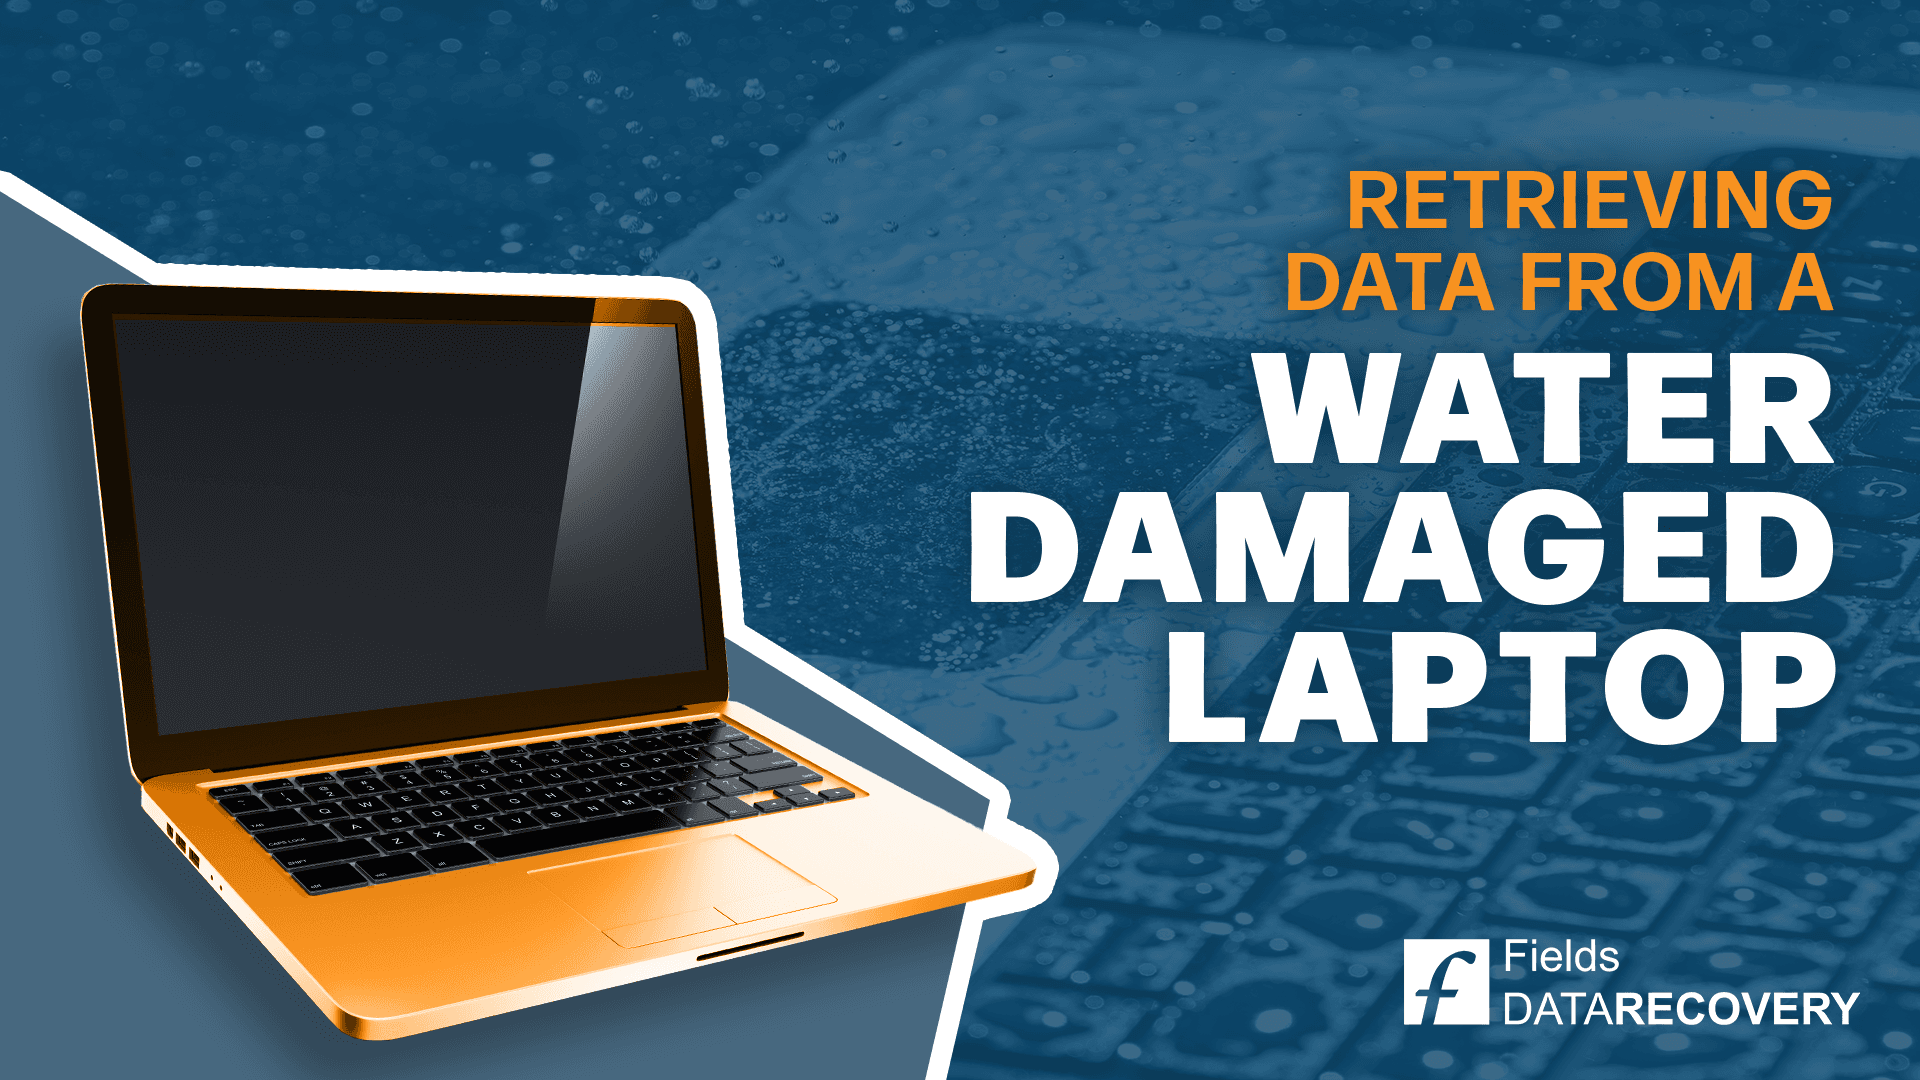 The Ultimate Guide To Retrieving Data From A Water Damaged Laptop